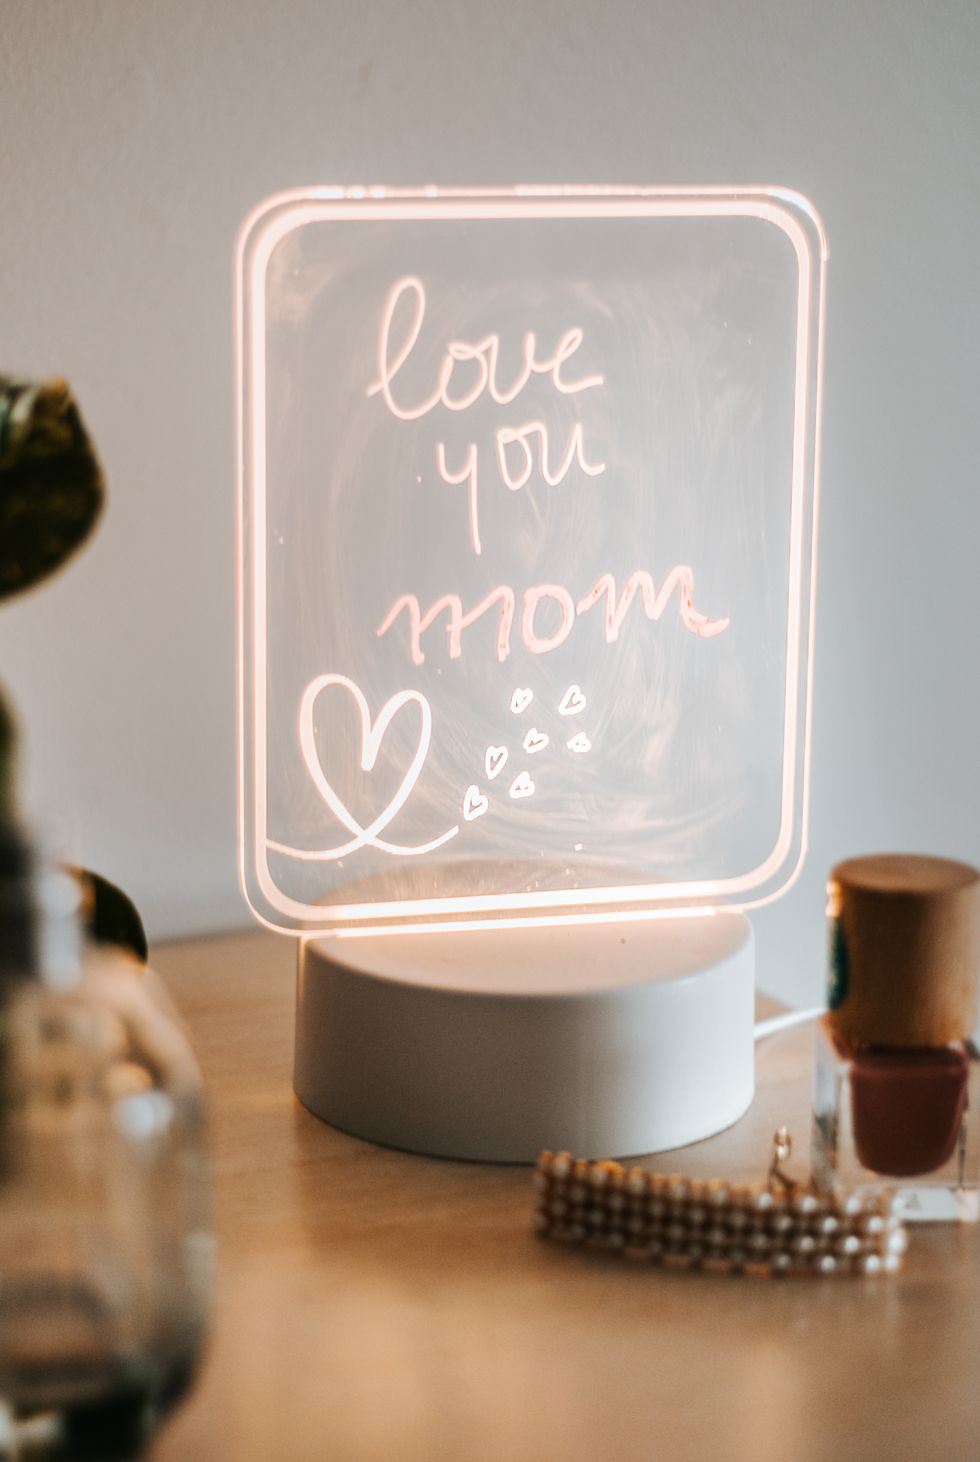 I love you mom quote with decorative light box